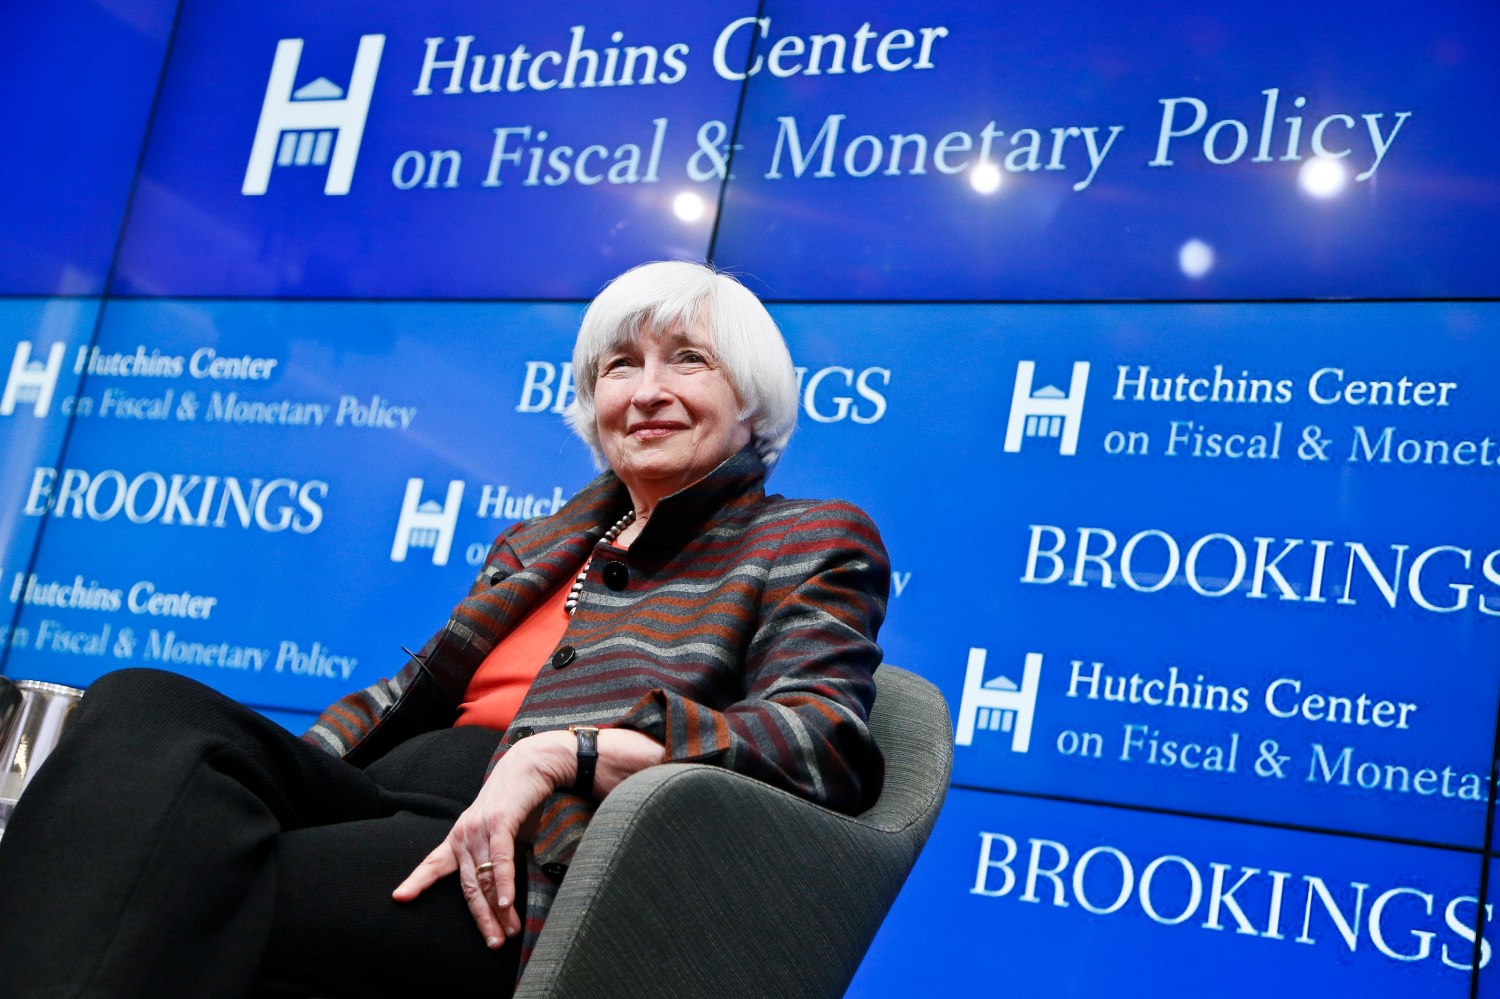 Janet Yellen, former Federal Reserve Chair, speaks at a Brookings event, February 2018